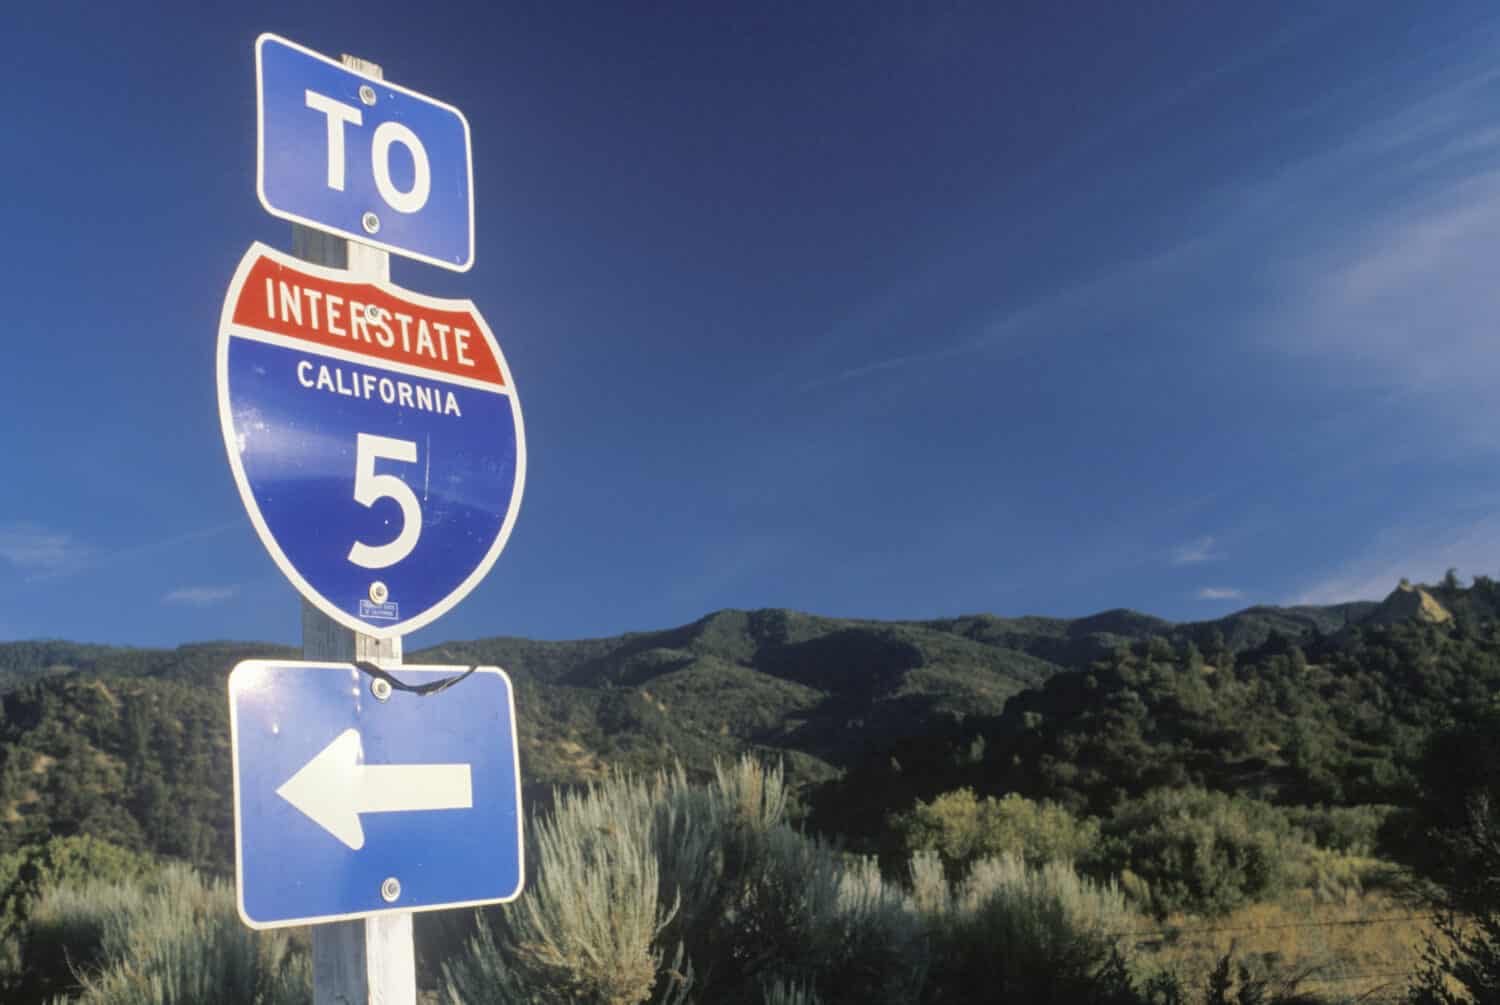 <p>The most dangerous road in the United States is the I-5 interstate in California. While the interstate stretches an impressive 796.77 miles long through the state, the most hazardous portion of the highway lies in San Diego County. Between 2015 and 2019, the San Diego portion of I-5 resulted in 99 fatal car accidents in which 110 people died.</p><p>Remember to scroll up and hit the ‘Follow’ button to keep up with the newest stories from Seattle Travel on your Microsoft Start feed or MSN homepage!</p>